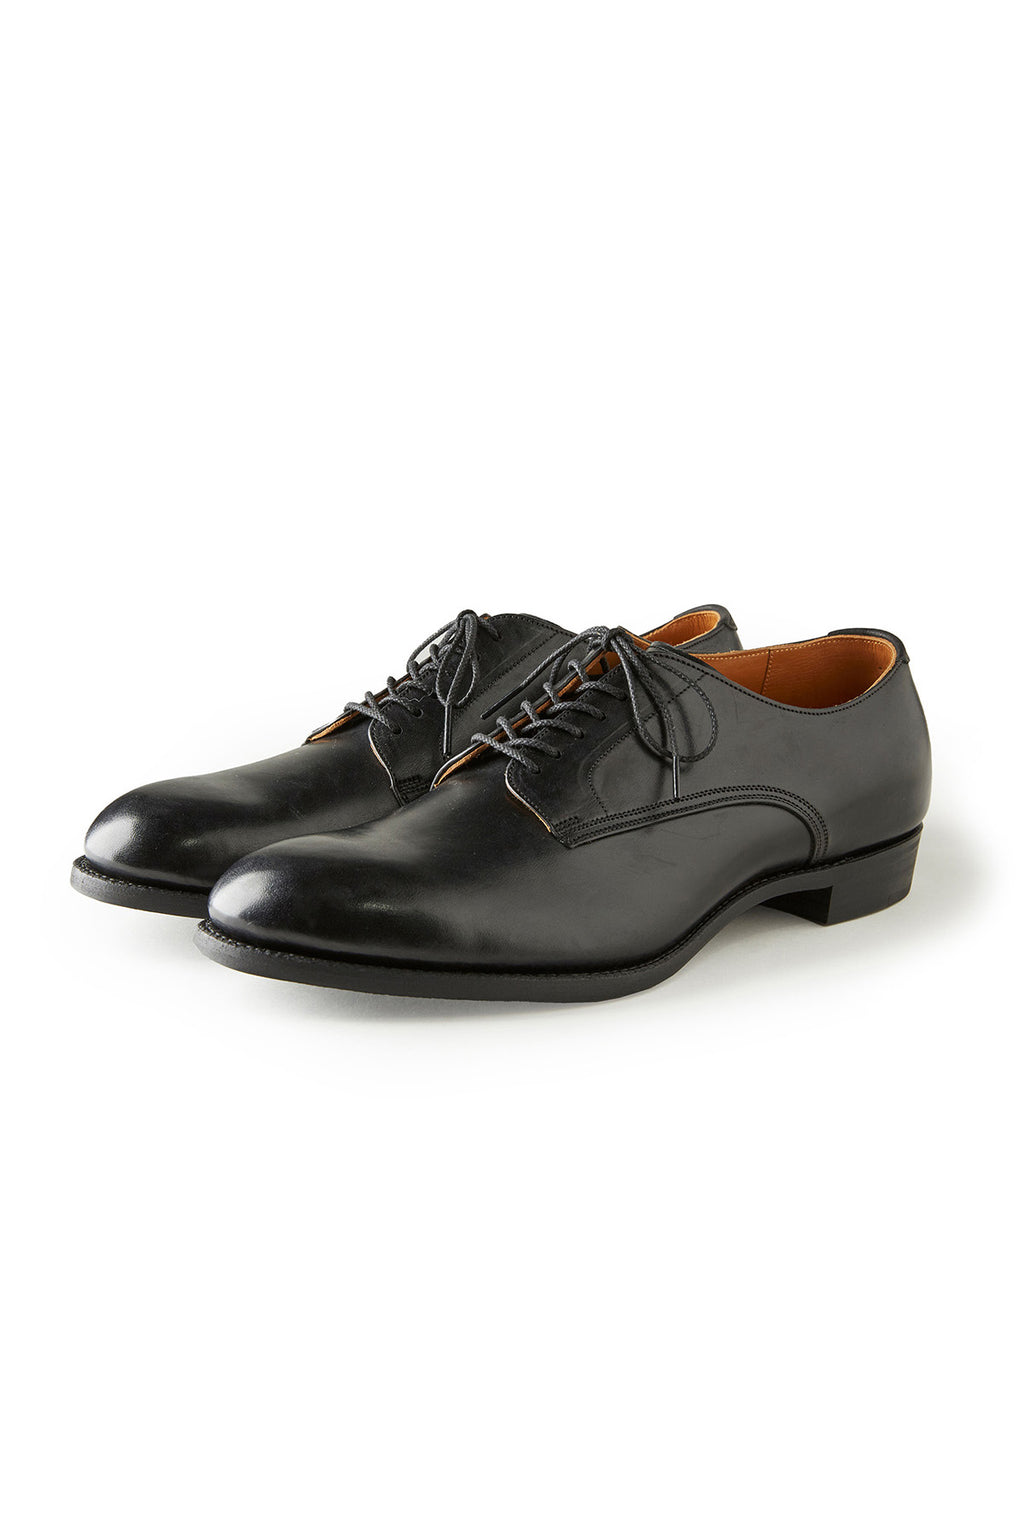 "The Officer" STUNNING LEATHER OXFORD SHOES - 231OJ-FW01